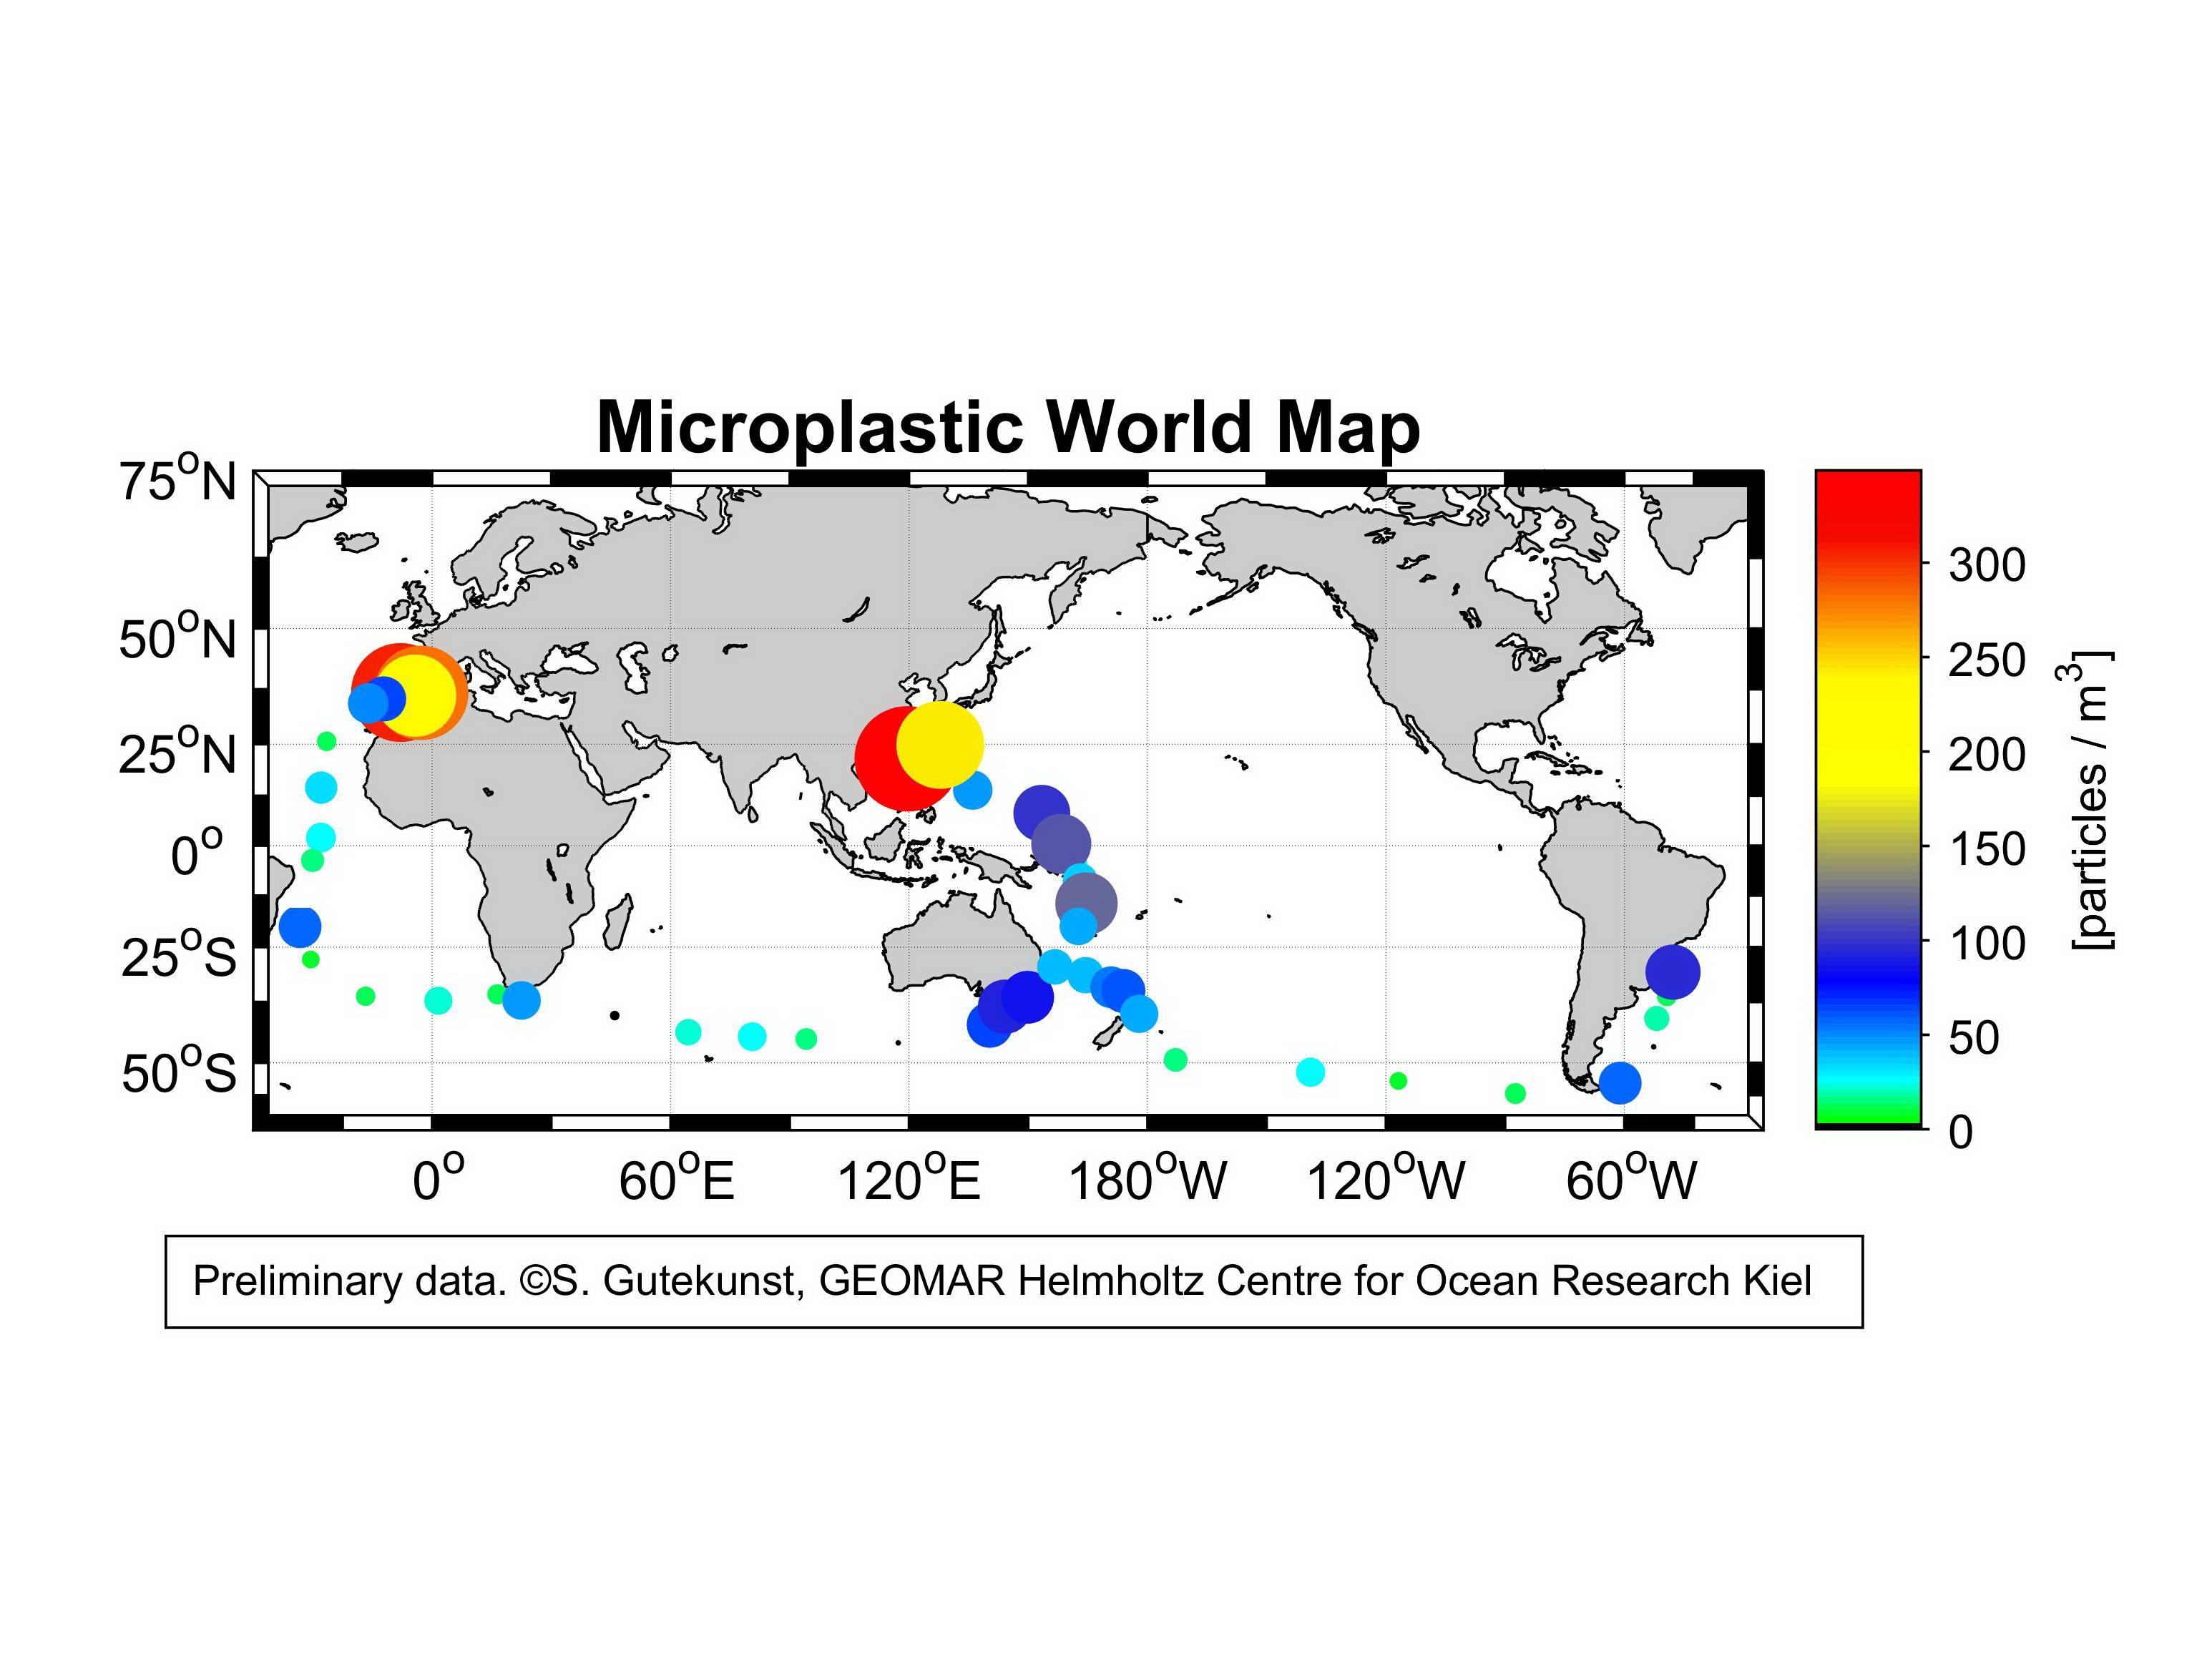 The preliminary data show microplastic along the entire racetrack. However, the concentrations differ from region to region
(c) Sören Gutekunst / Ocean of the future